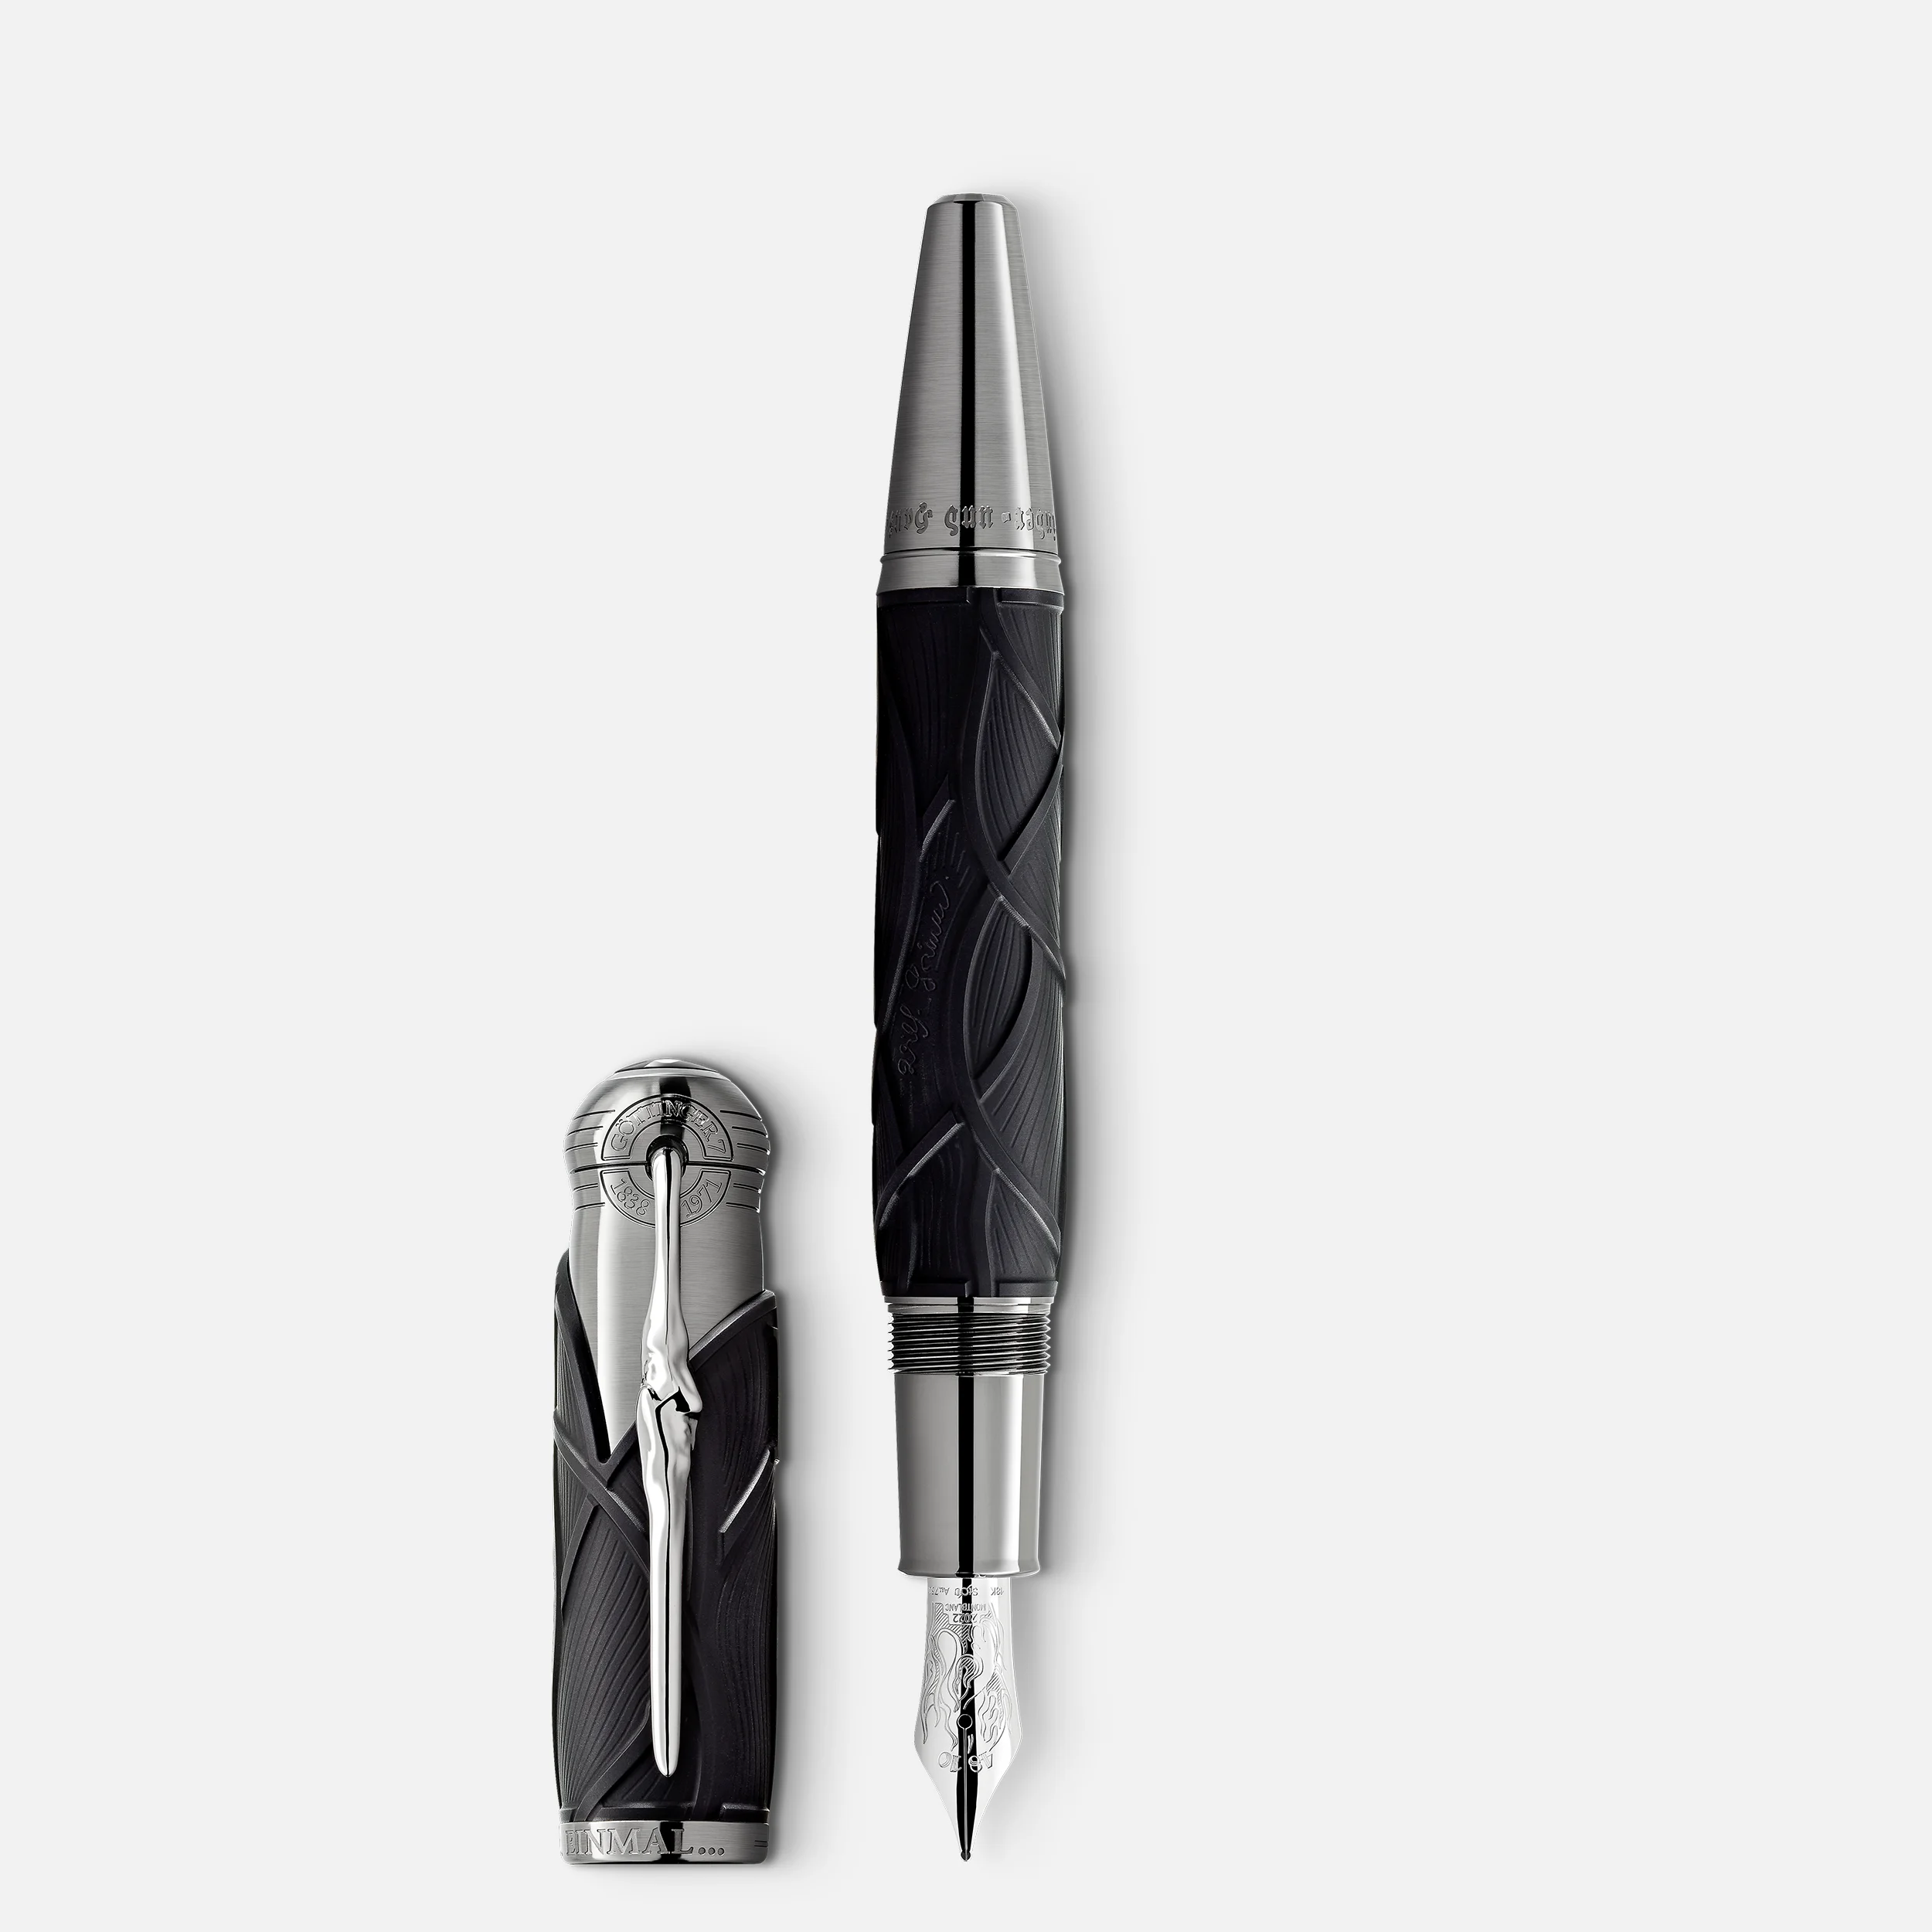 Montblanc Penna Stilografica Writers Edition Homage to Brothers Grimm Edizione Limitata